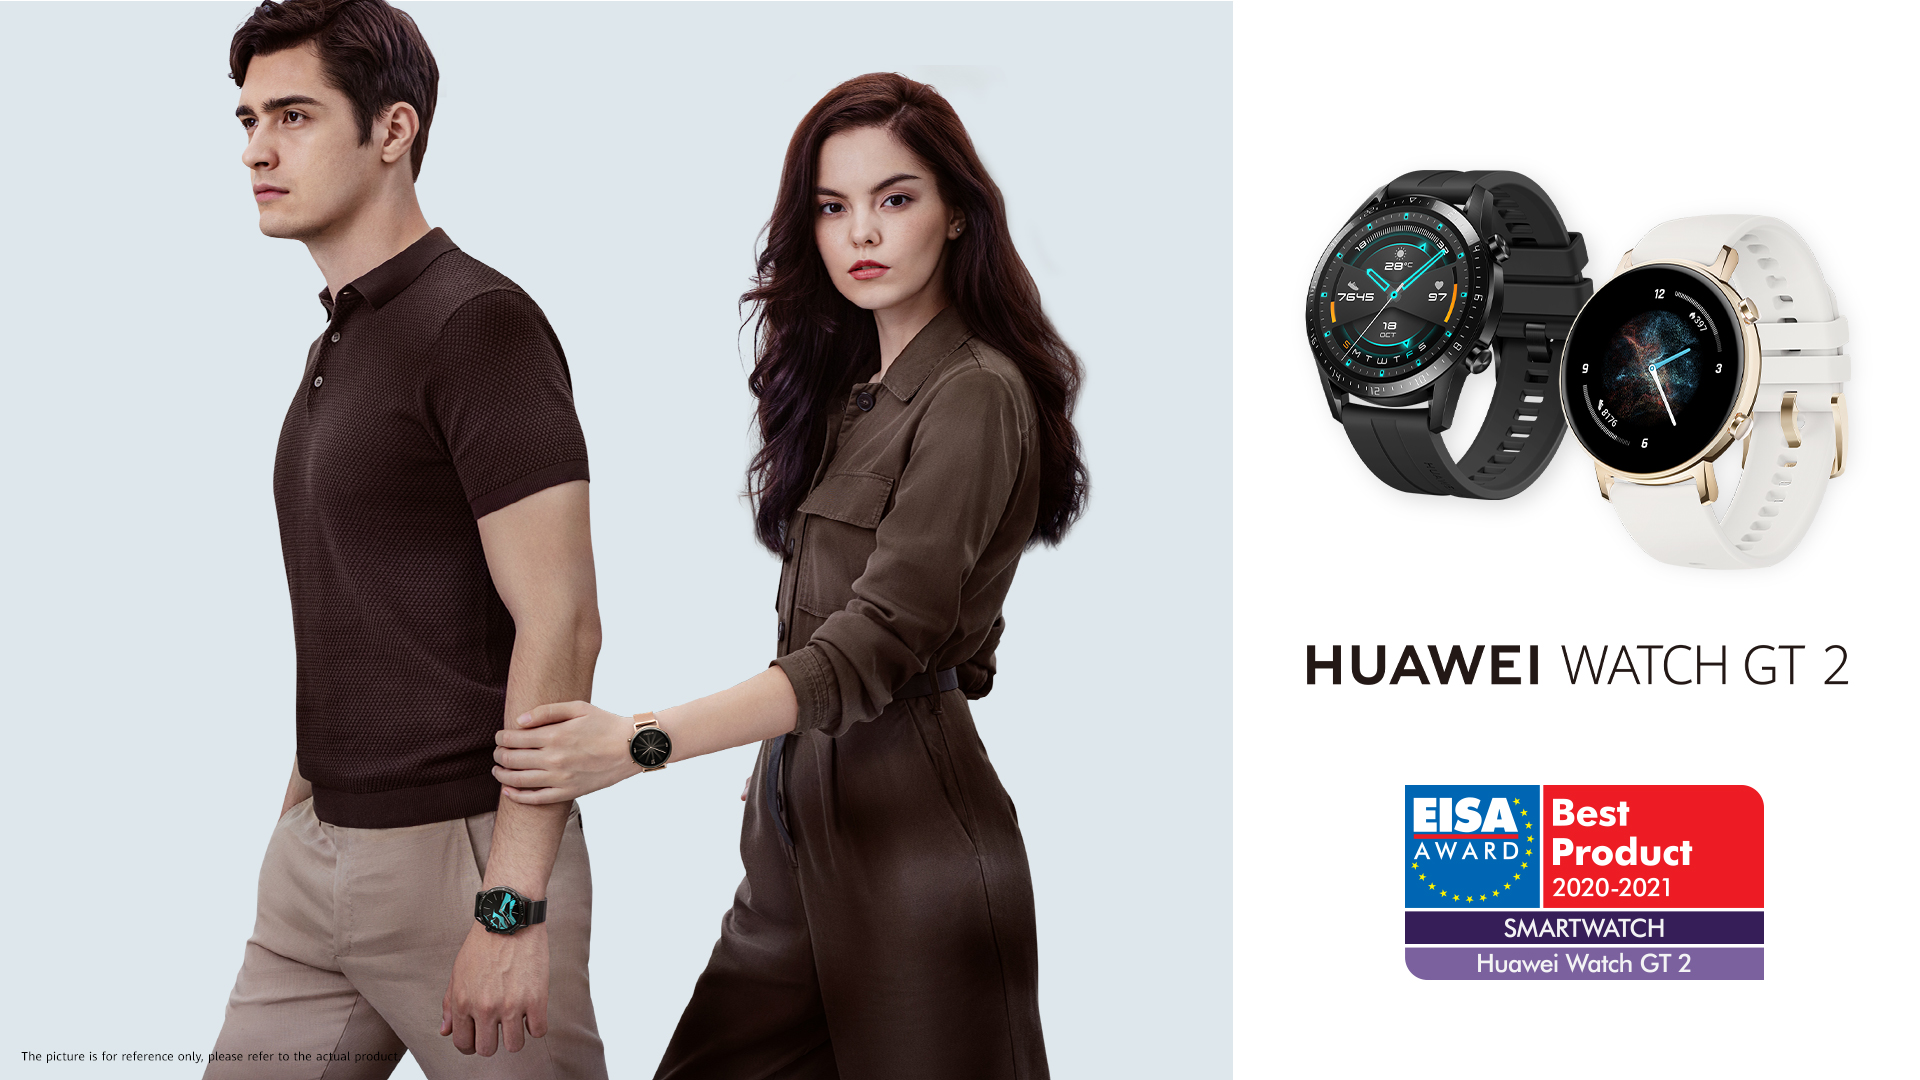 Image for Huawei Wins Two EISA Awards For “Best Smartphone Camera” With The HUAWEI P40 Pro And “Best Smartwatch” For HUAWEI WATCH GT 2